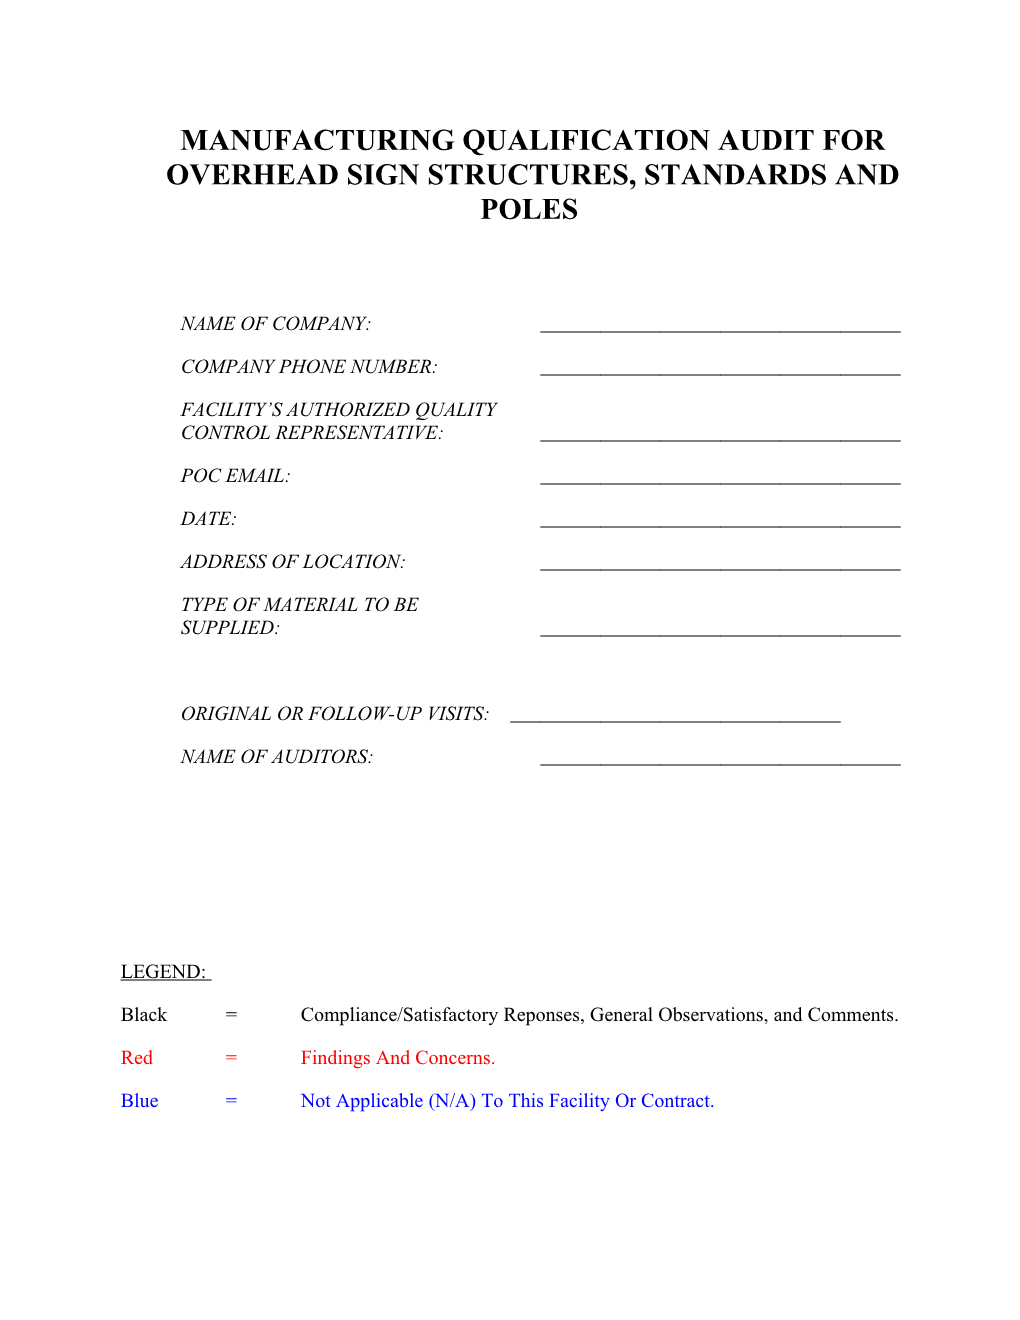 Manufacturing Qualification Audit for Over Head Sign and Pole Structures